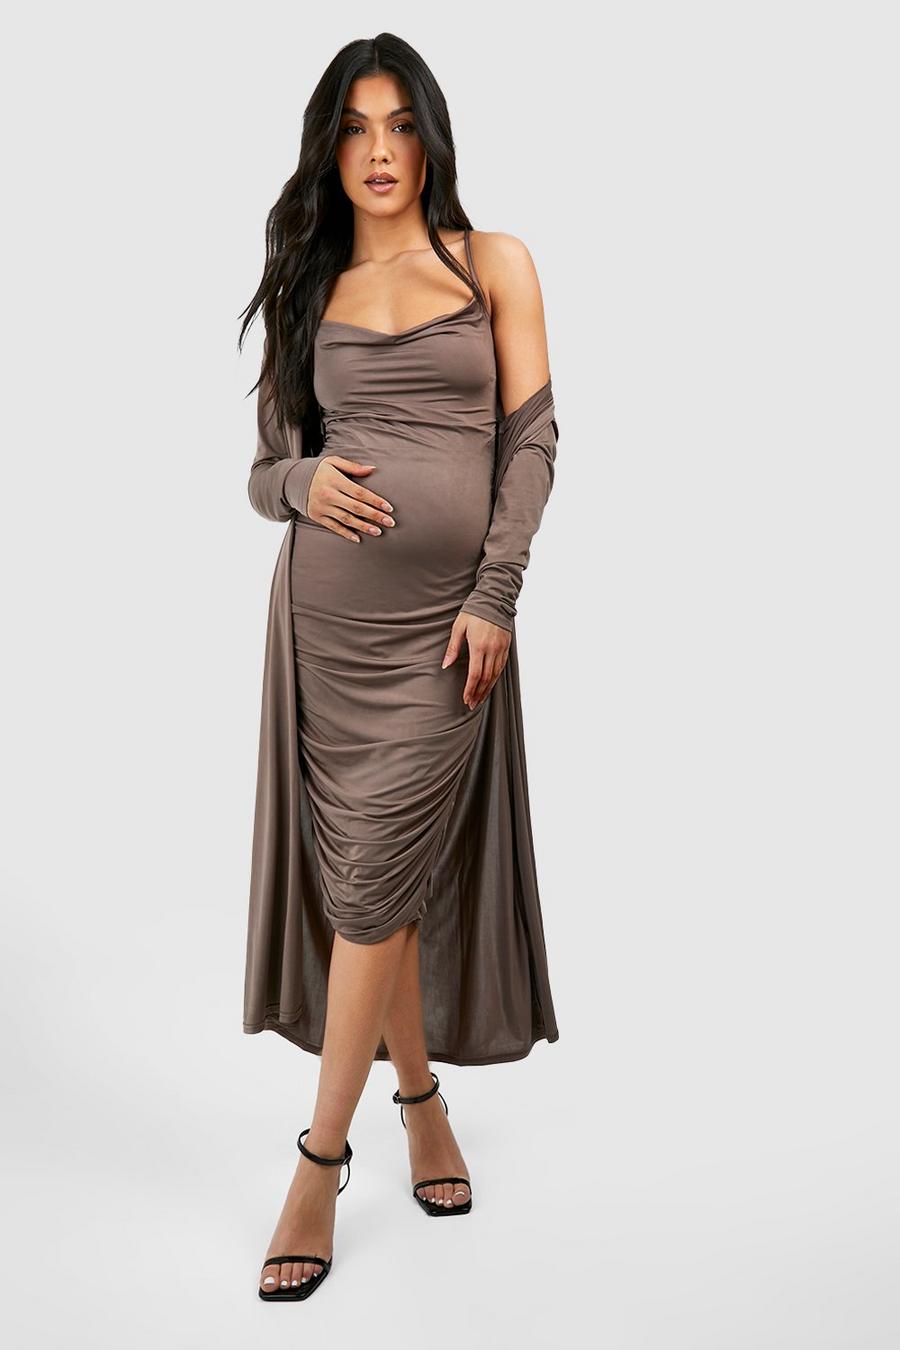 Mocha beige Maternity Strappy Cowl Neck Dress And Duster Coat